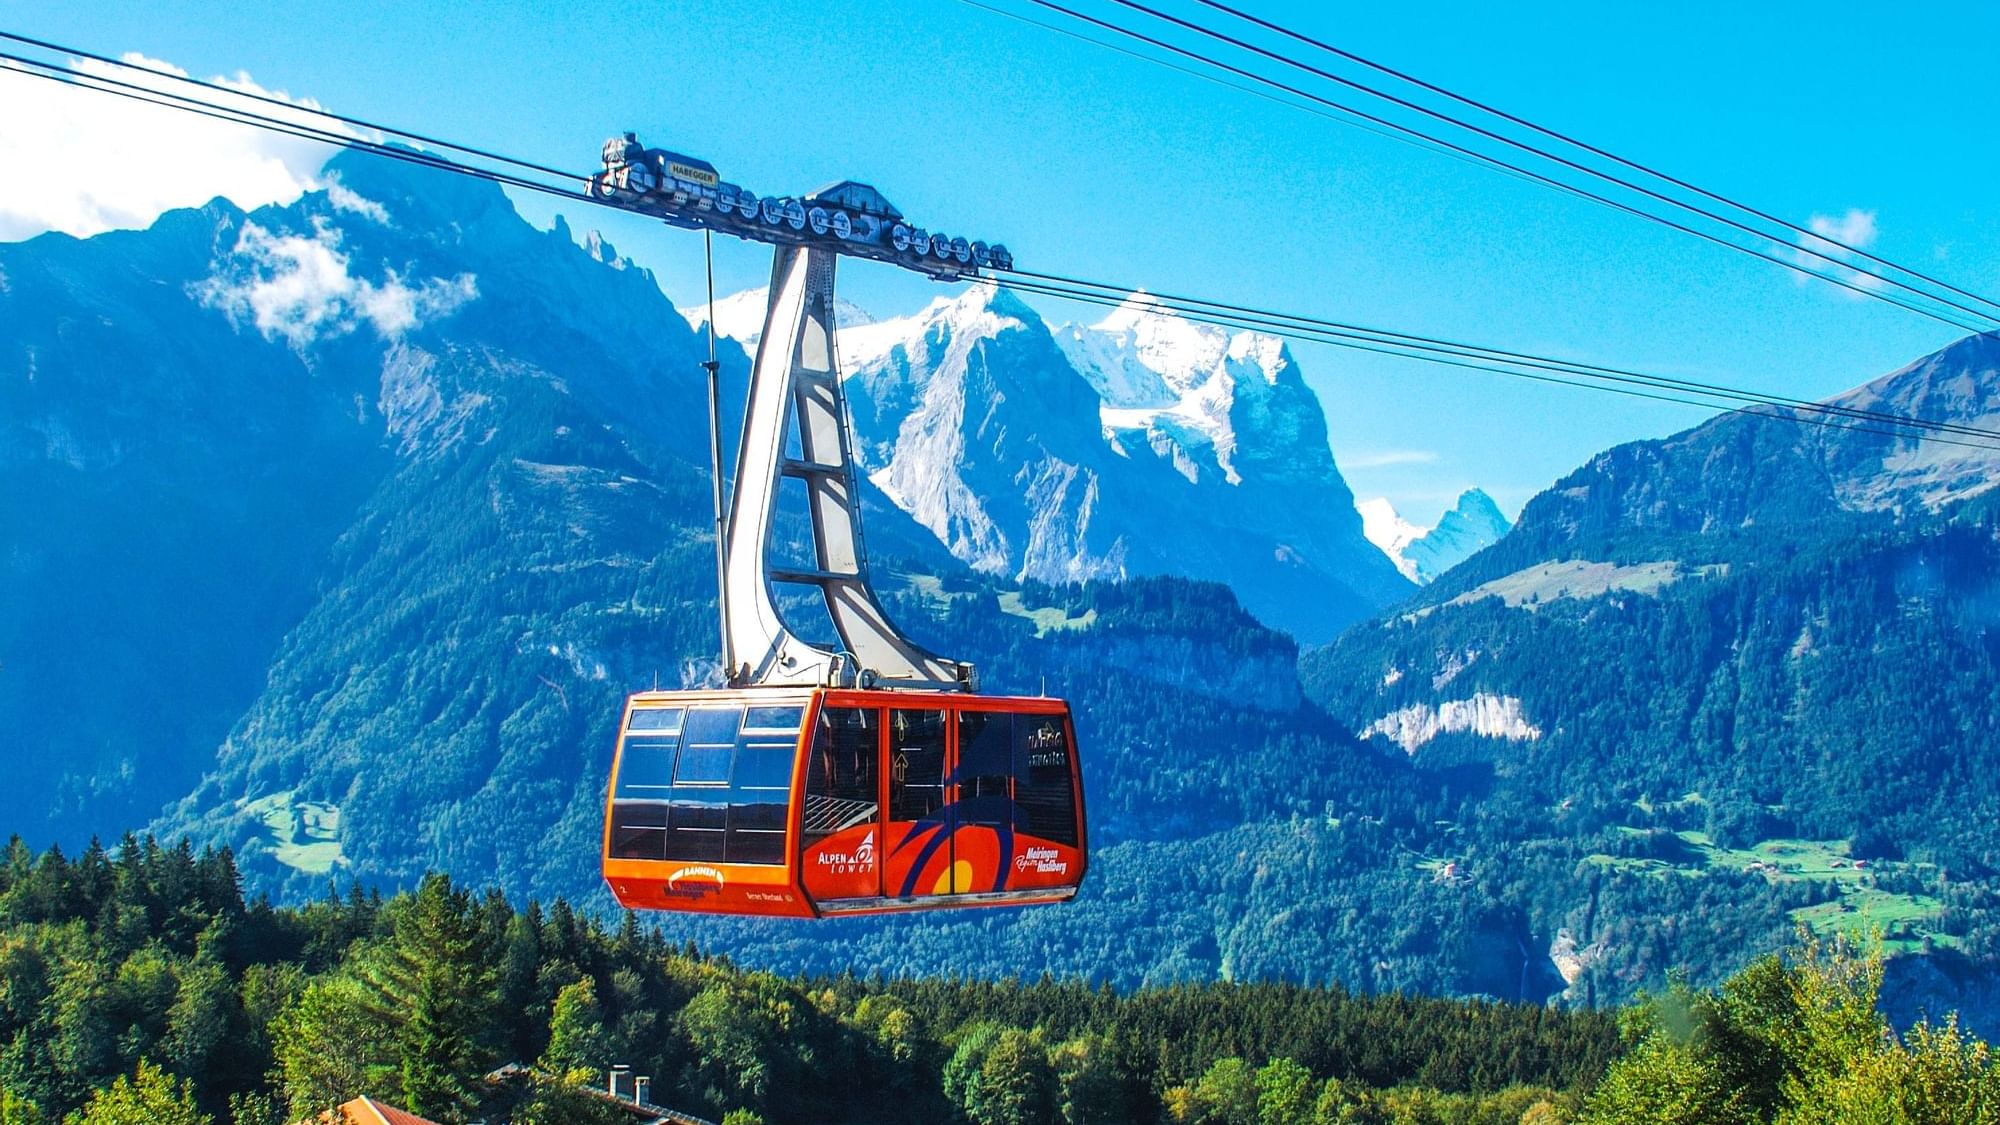 View of the cable car near The Original Hotels